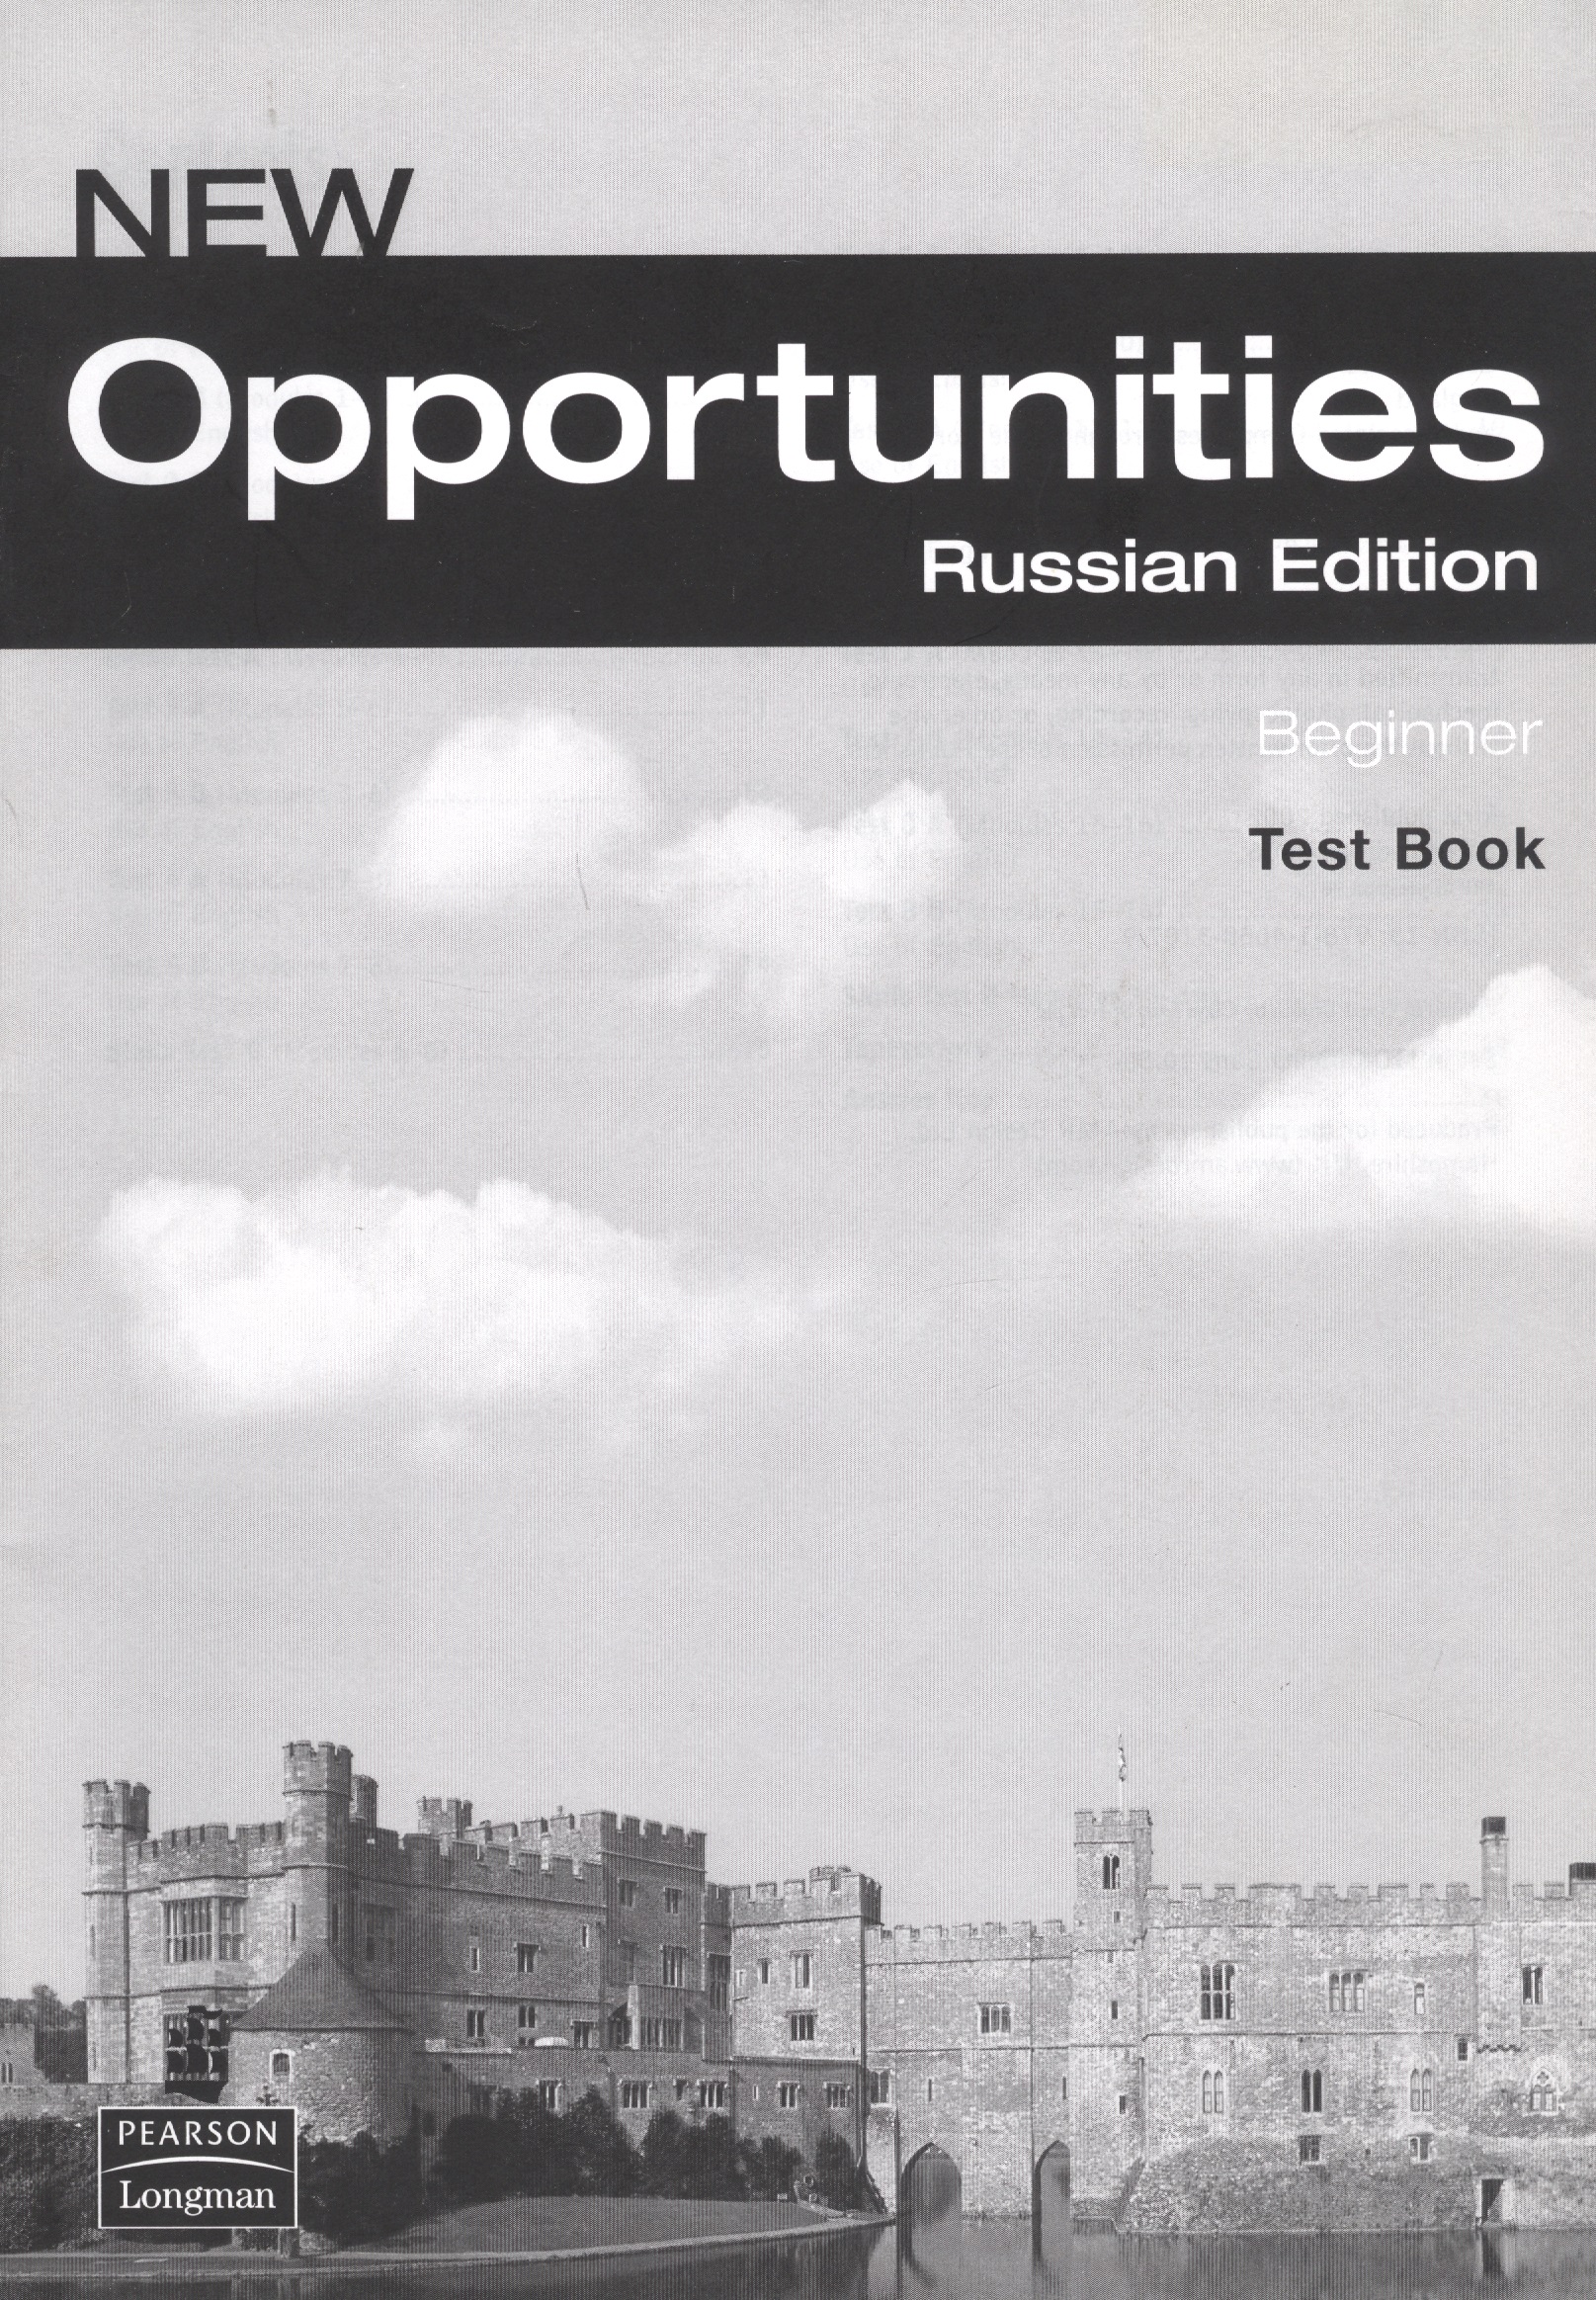 New opportunities book. New opportunities pre-Intermediate Test book. Книга opportunities Beginner. New opportunities Beginner. New opportunities Russian Edition.